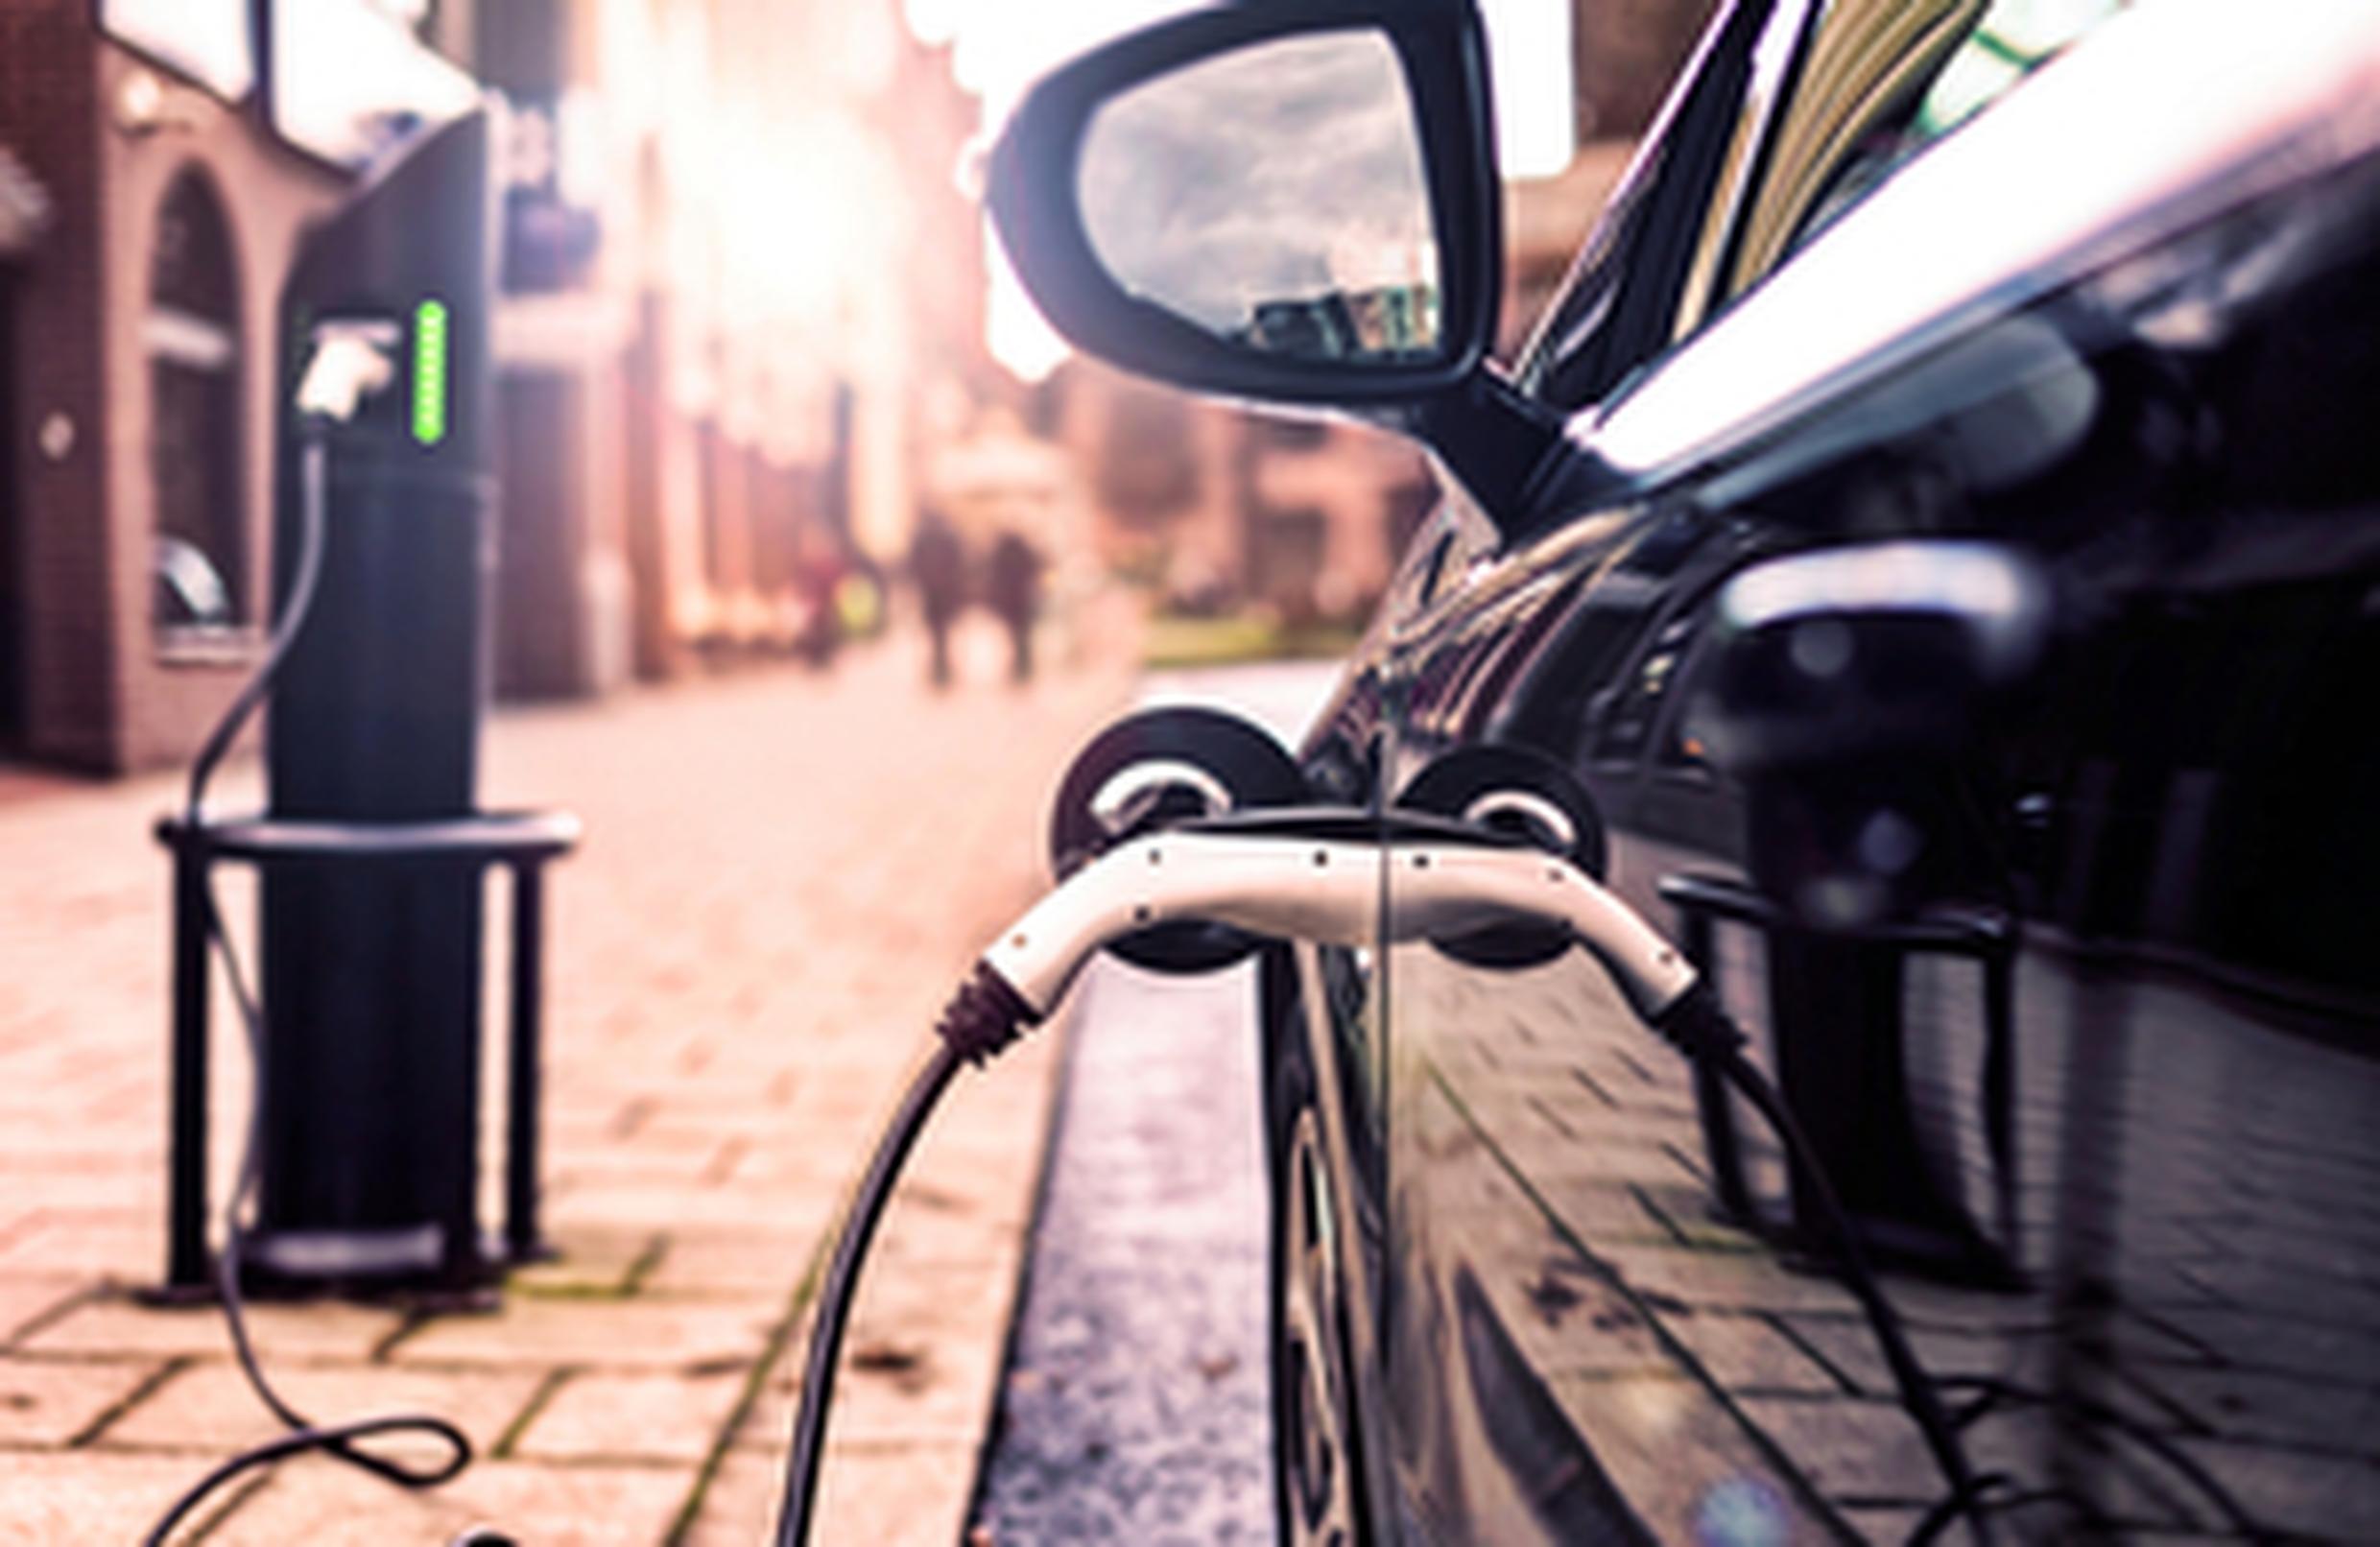 The Geospatial Commission`s discovery project will support the approach set out in the government’s Electric Vehicle Infrastructure Strategy